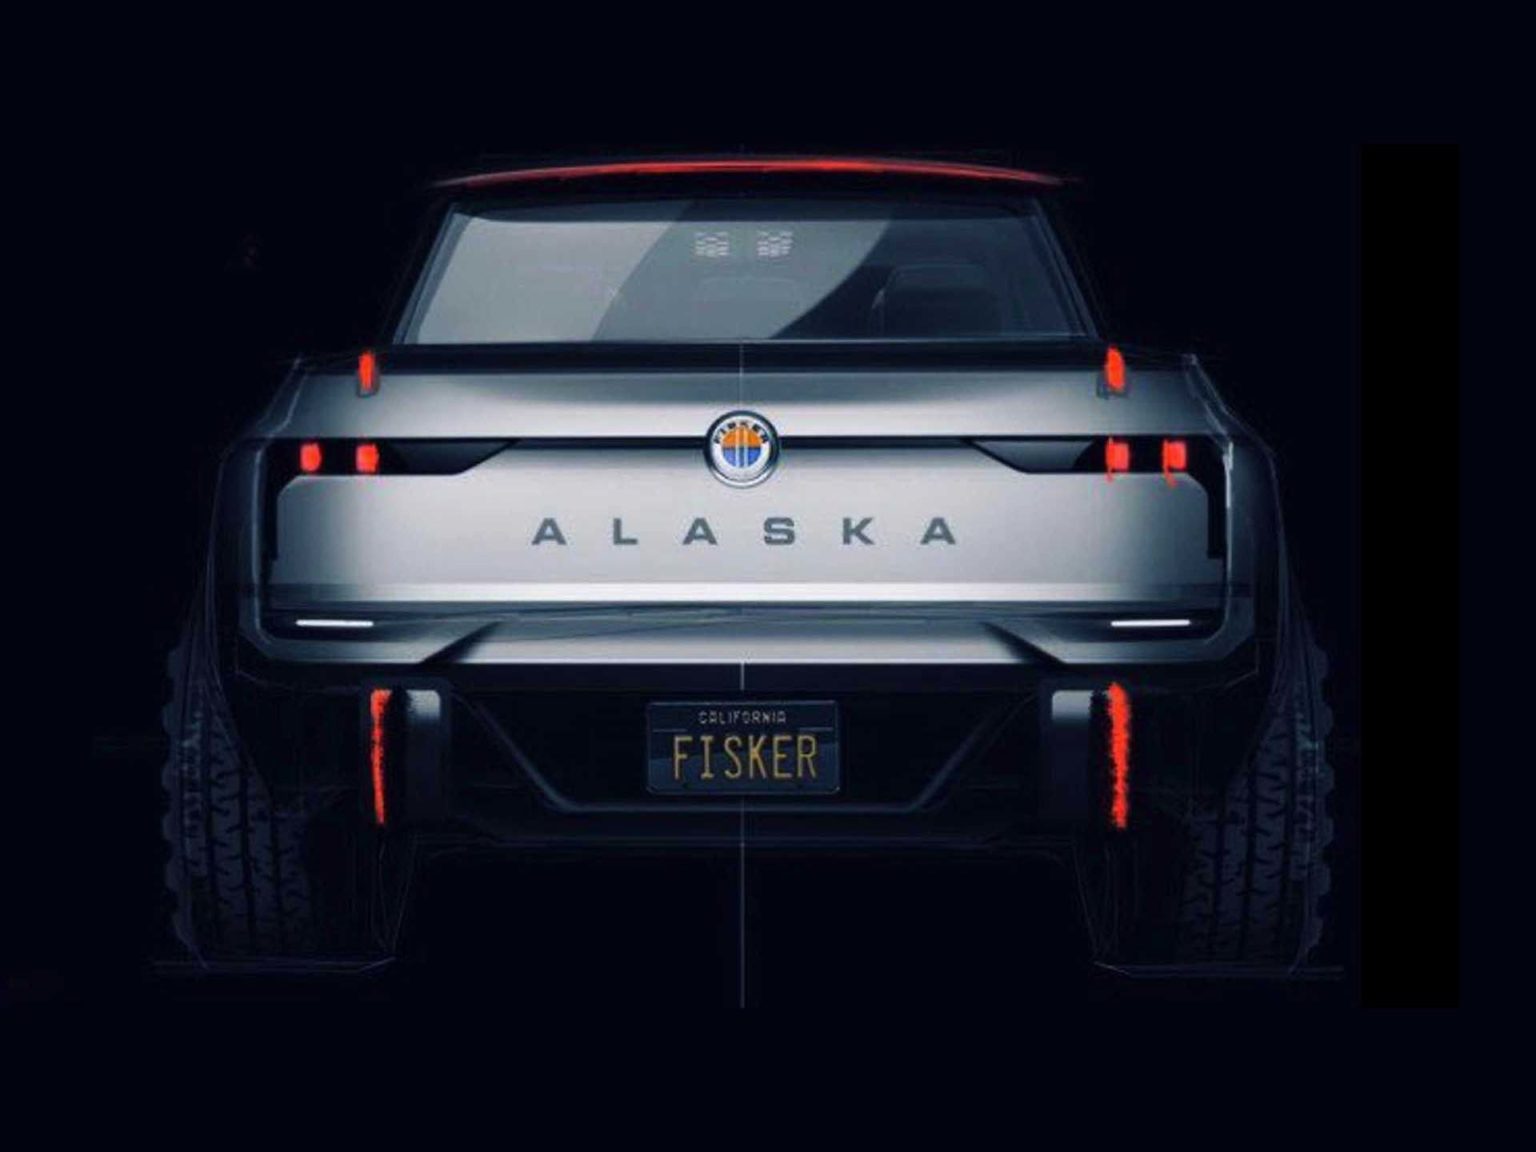 Henrik Fisker, the CEO of Fisker, accidentally tweeted a picture of Ann electric pickup truck, or did he?